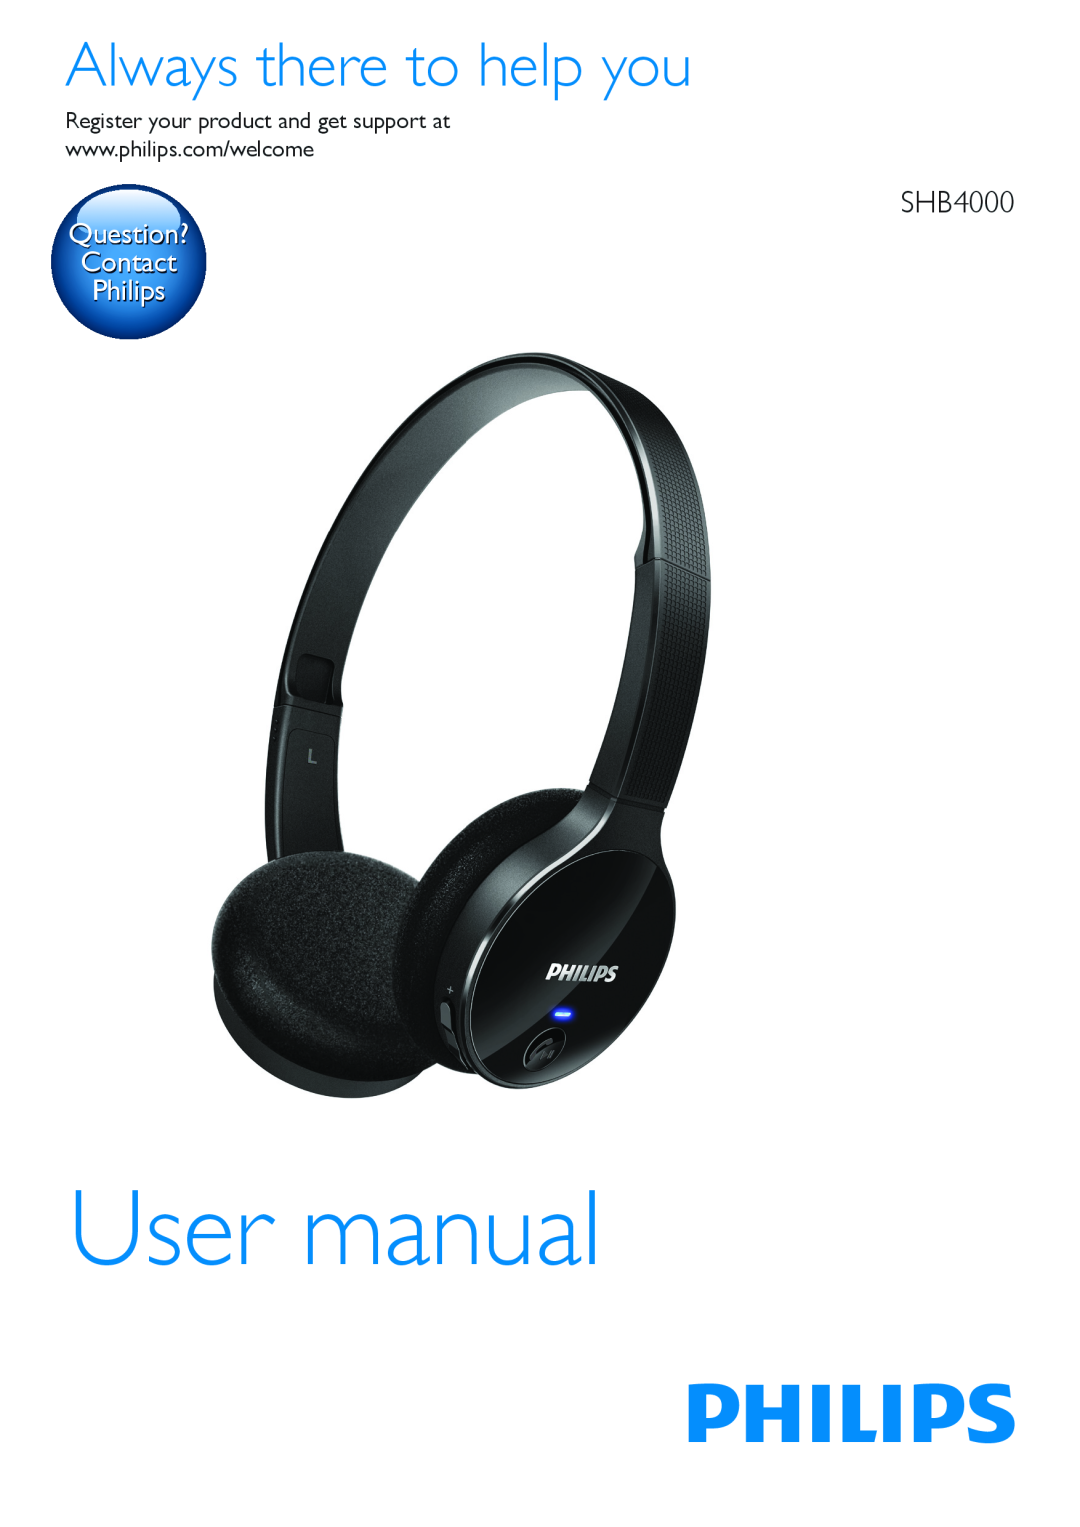 Philips SHB4000 user manual Always there to help you, Question? Contact Philips 